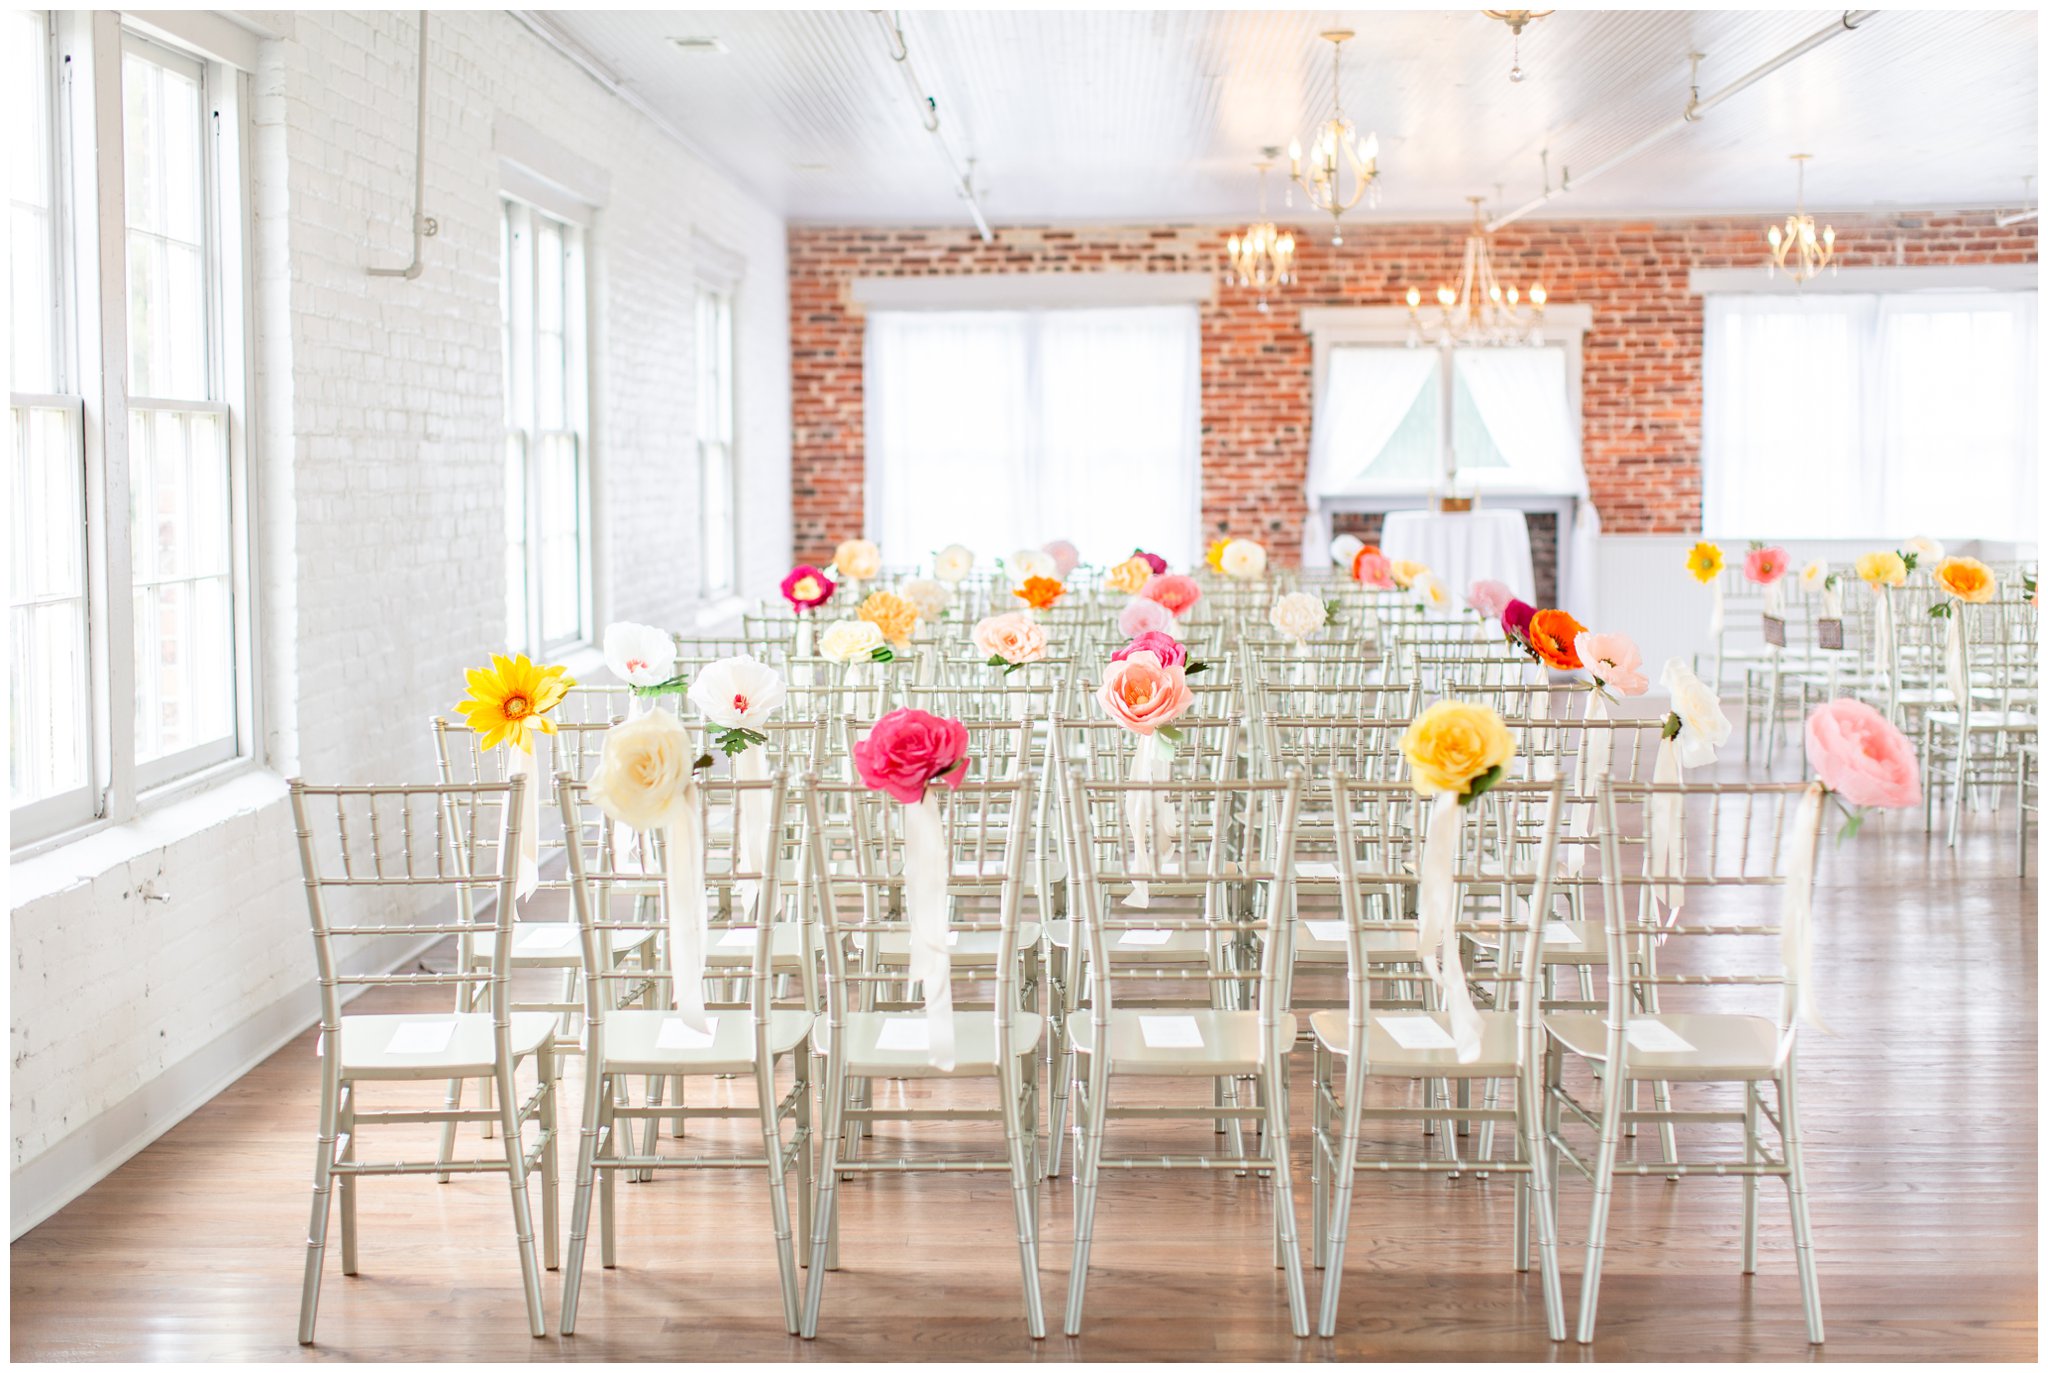 Woolen Mill wedding at the Silk Mill by Taylor Rose Photography